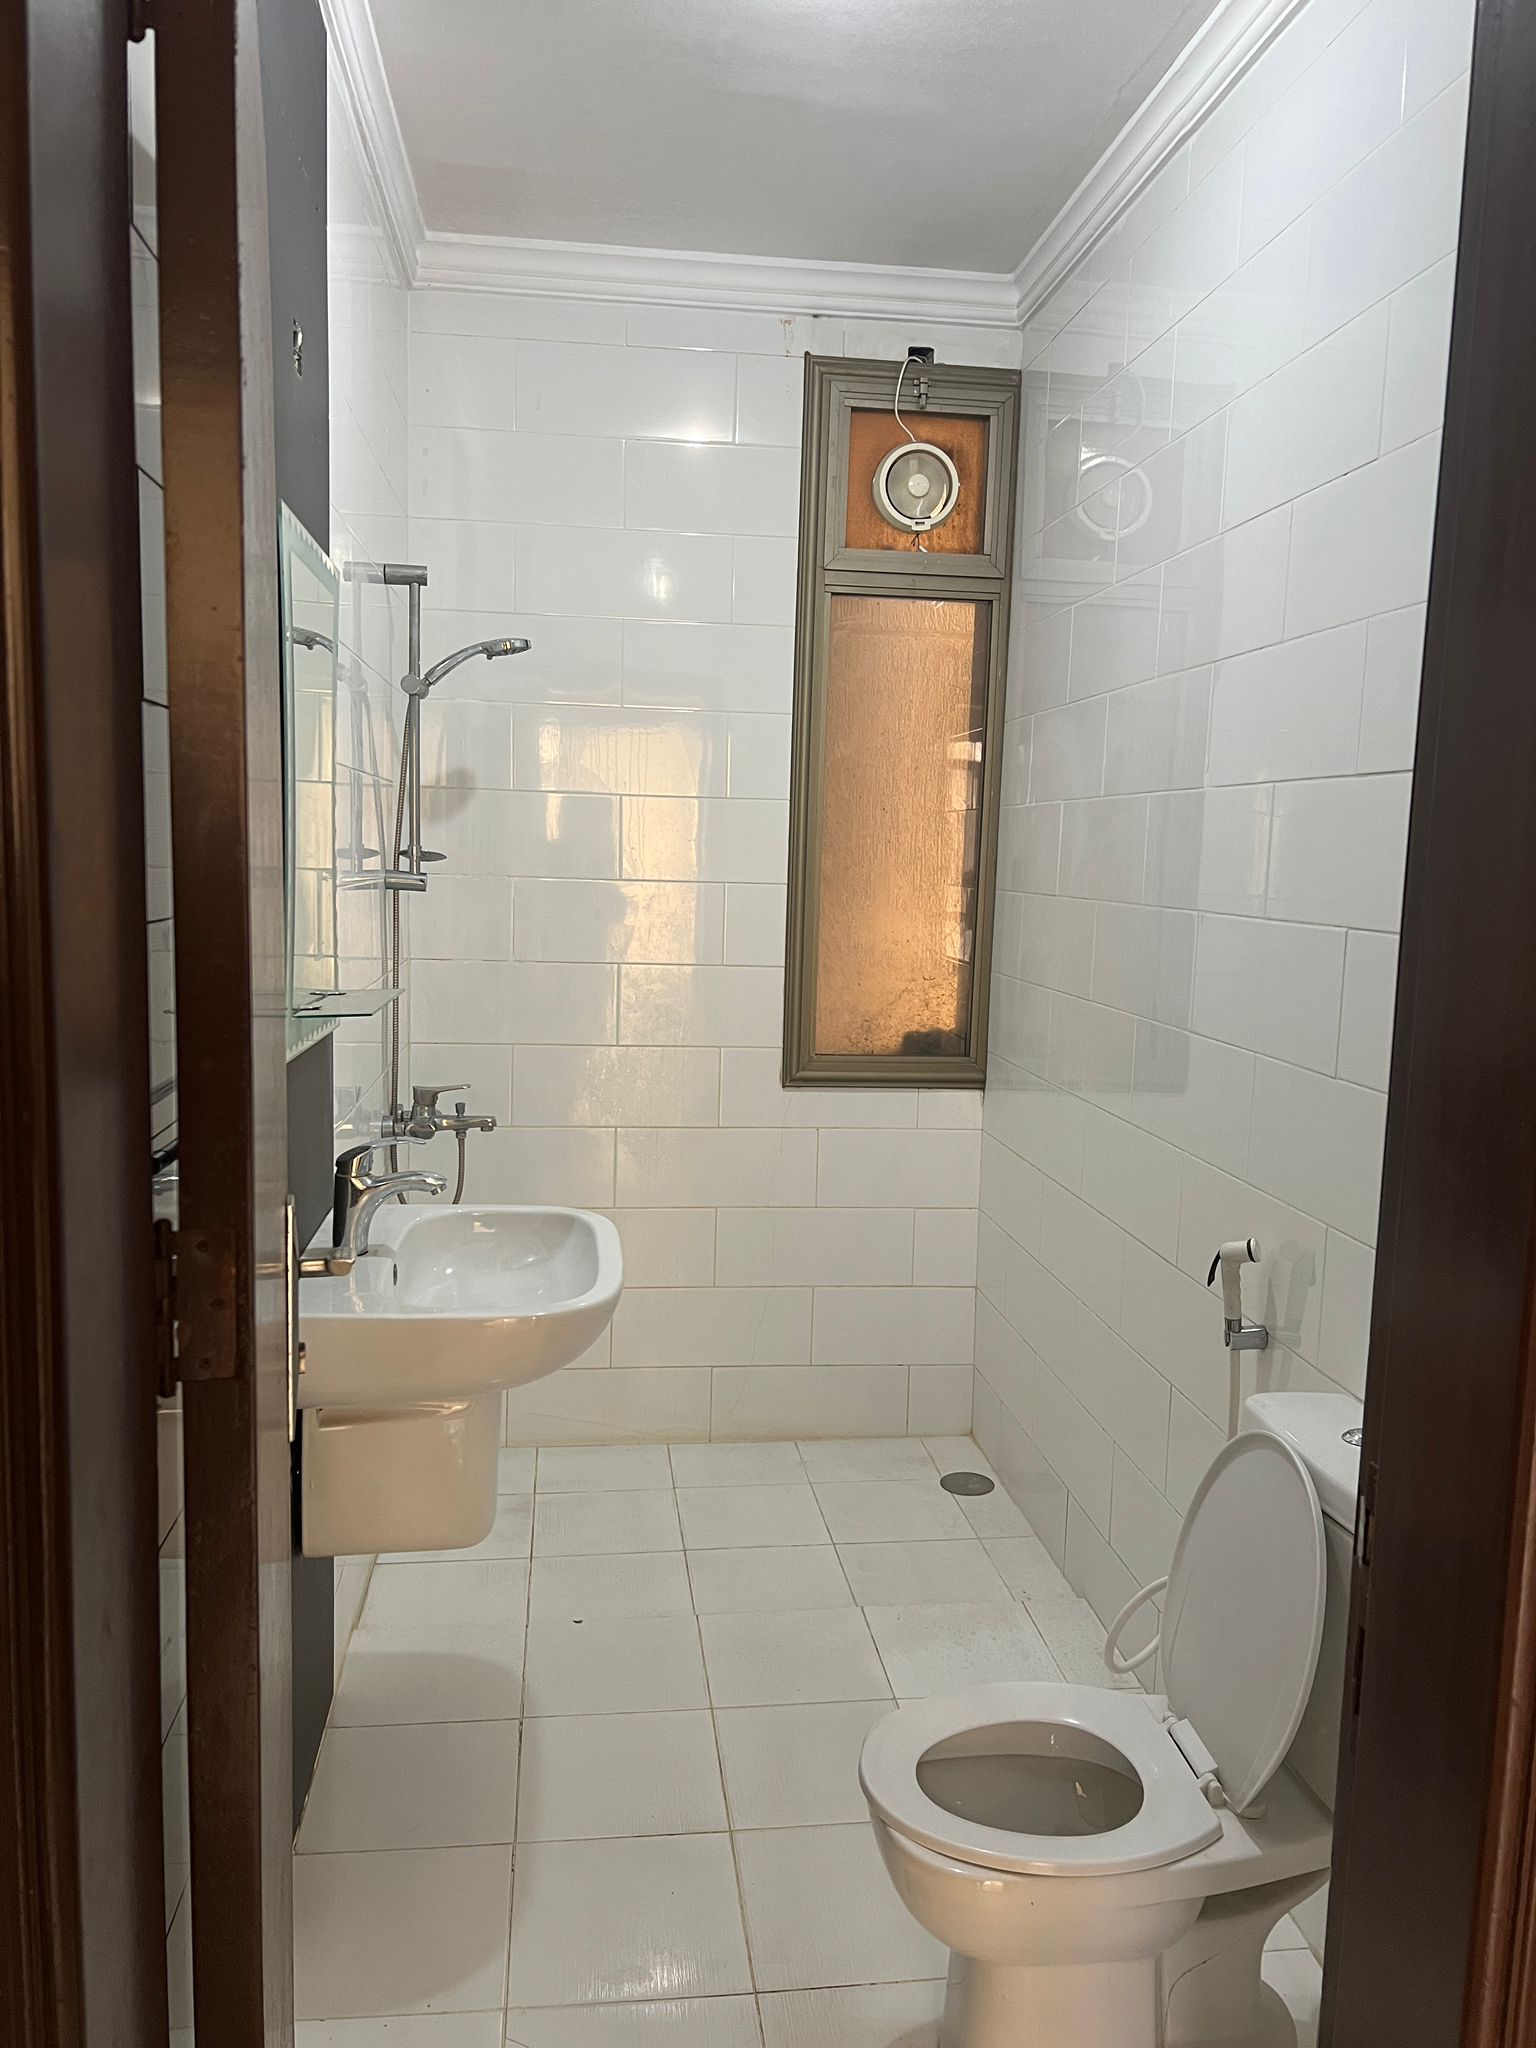 2 bhk flat for rent in Mangfa